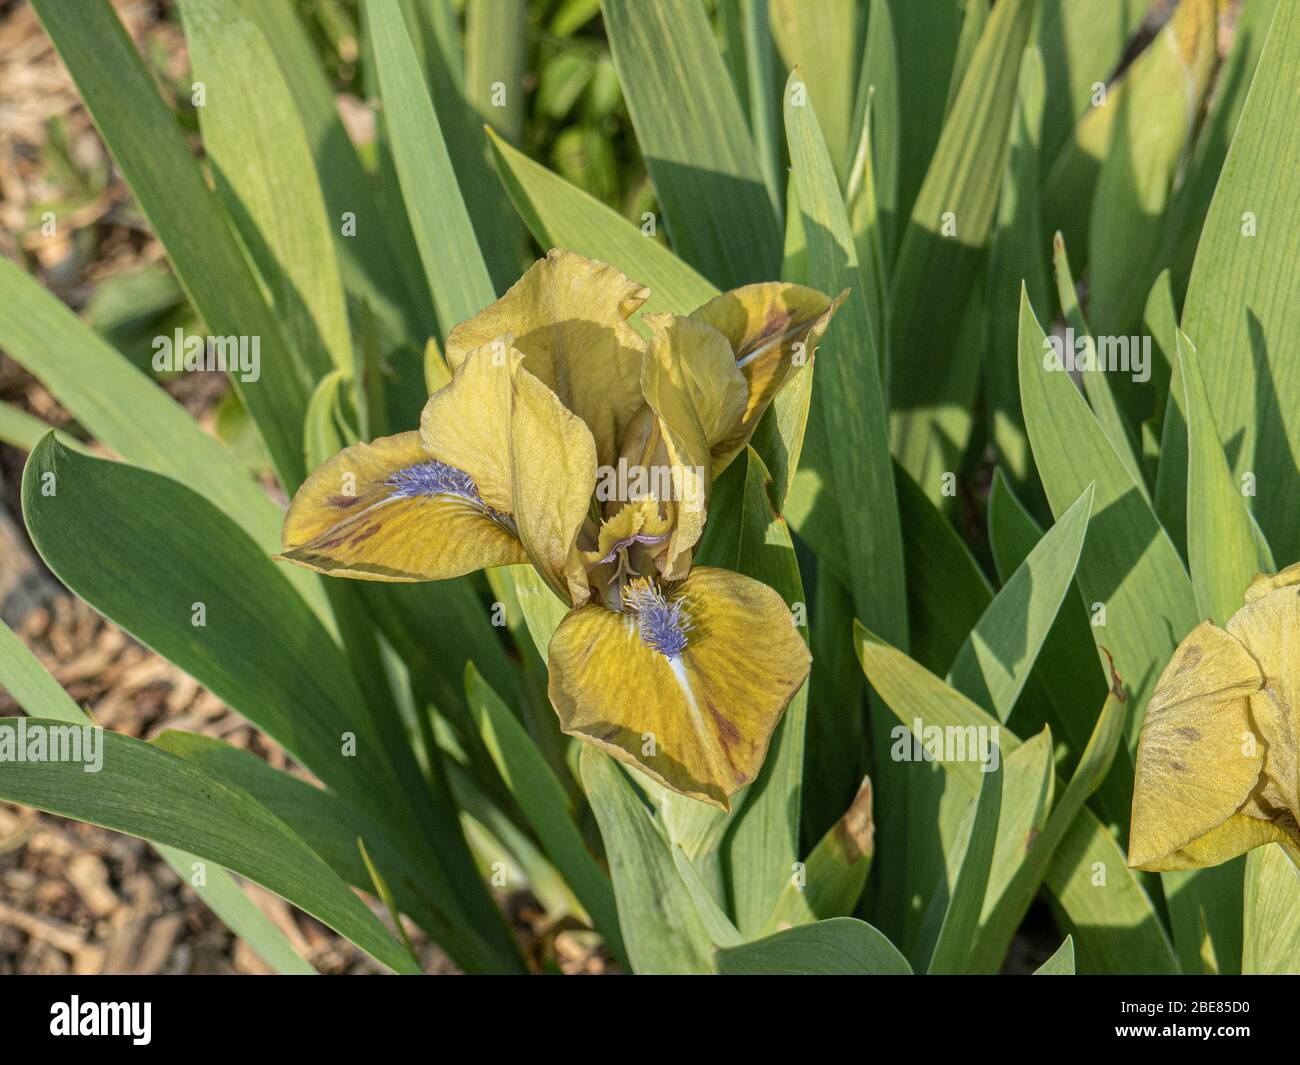 A close up of a single dusty yellow flower of dwarf Iris Prince Stock Photo